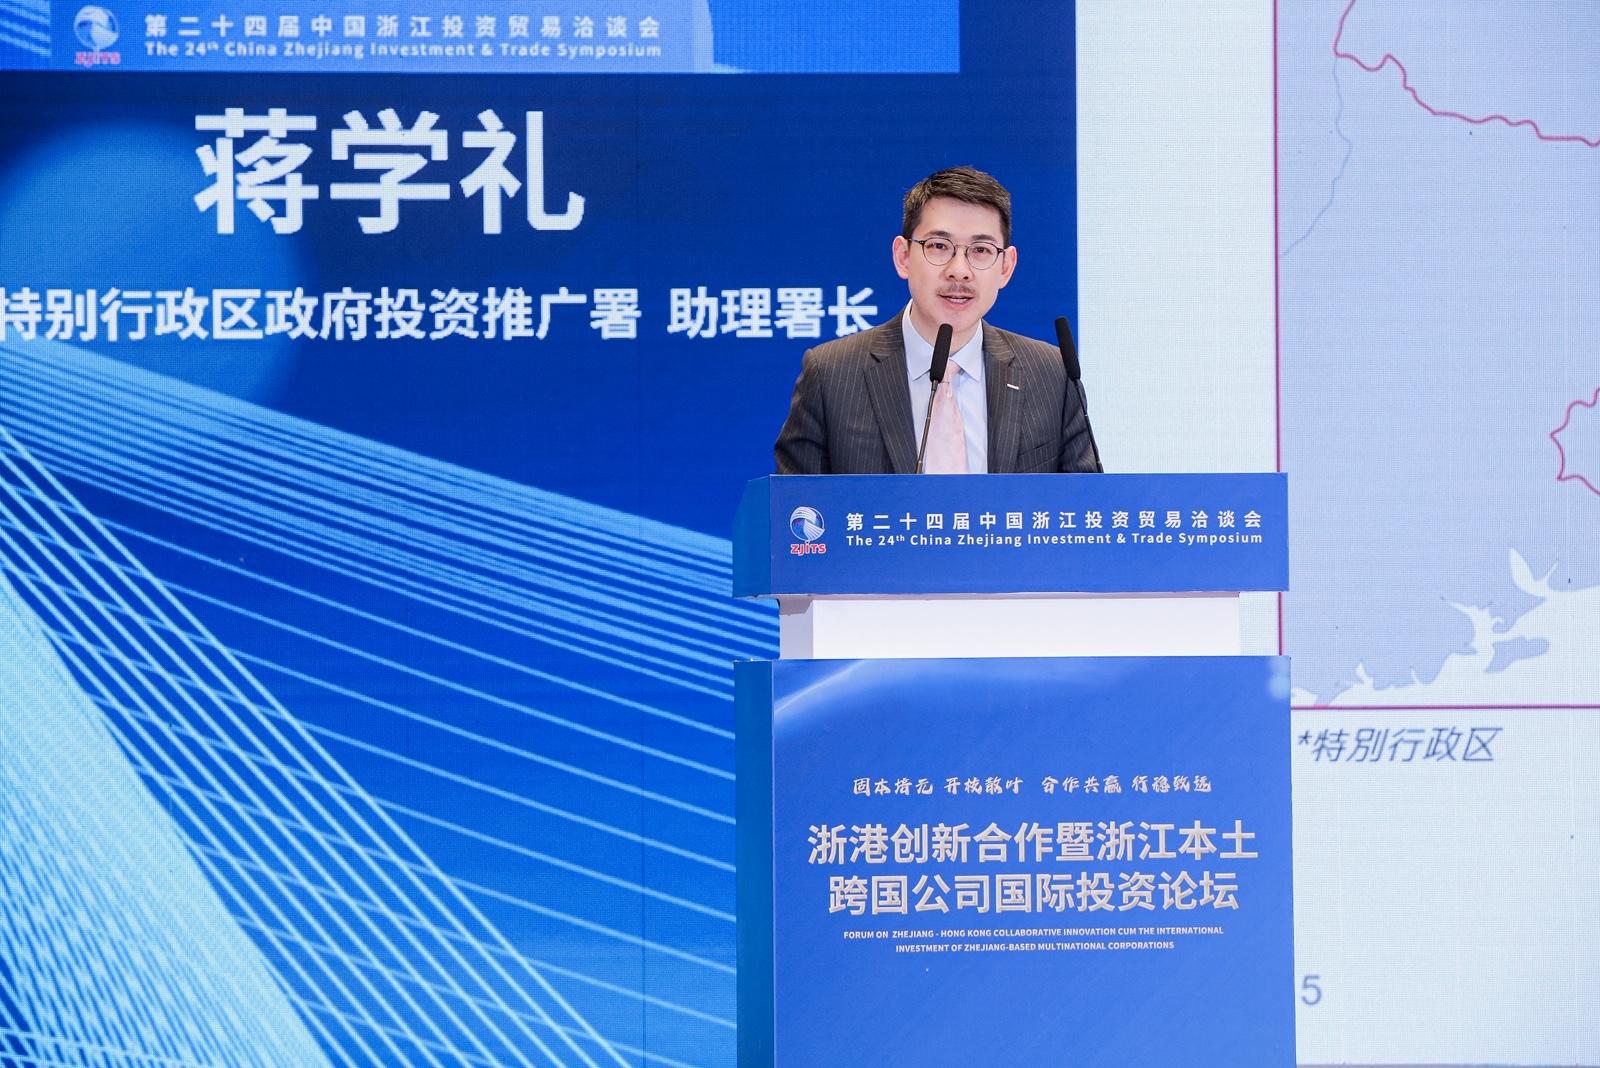 Invest Hong Kong (InvestHK) and Mainland government authorities co-hosted a forum in Hangzhou, Zhejiang Province today (May 18), encouraging Zhejiang enterprises to make use of Hong Kong's business advantages and opportunities in innovation development amid the Belt and Road Initiative and the Guangdong-Hong Kong-Macao Greater Bay Area development to accelerate their overseas expansion. Photo shows the Associate Director-General of Investment Promotion of InvestHK, Dr Jimmy Chiang, speaking at the thematic sharing session.


